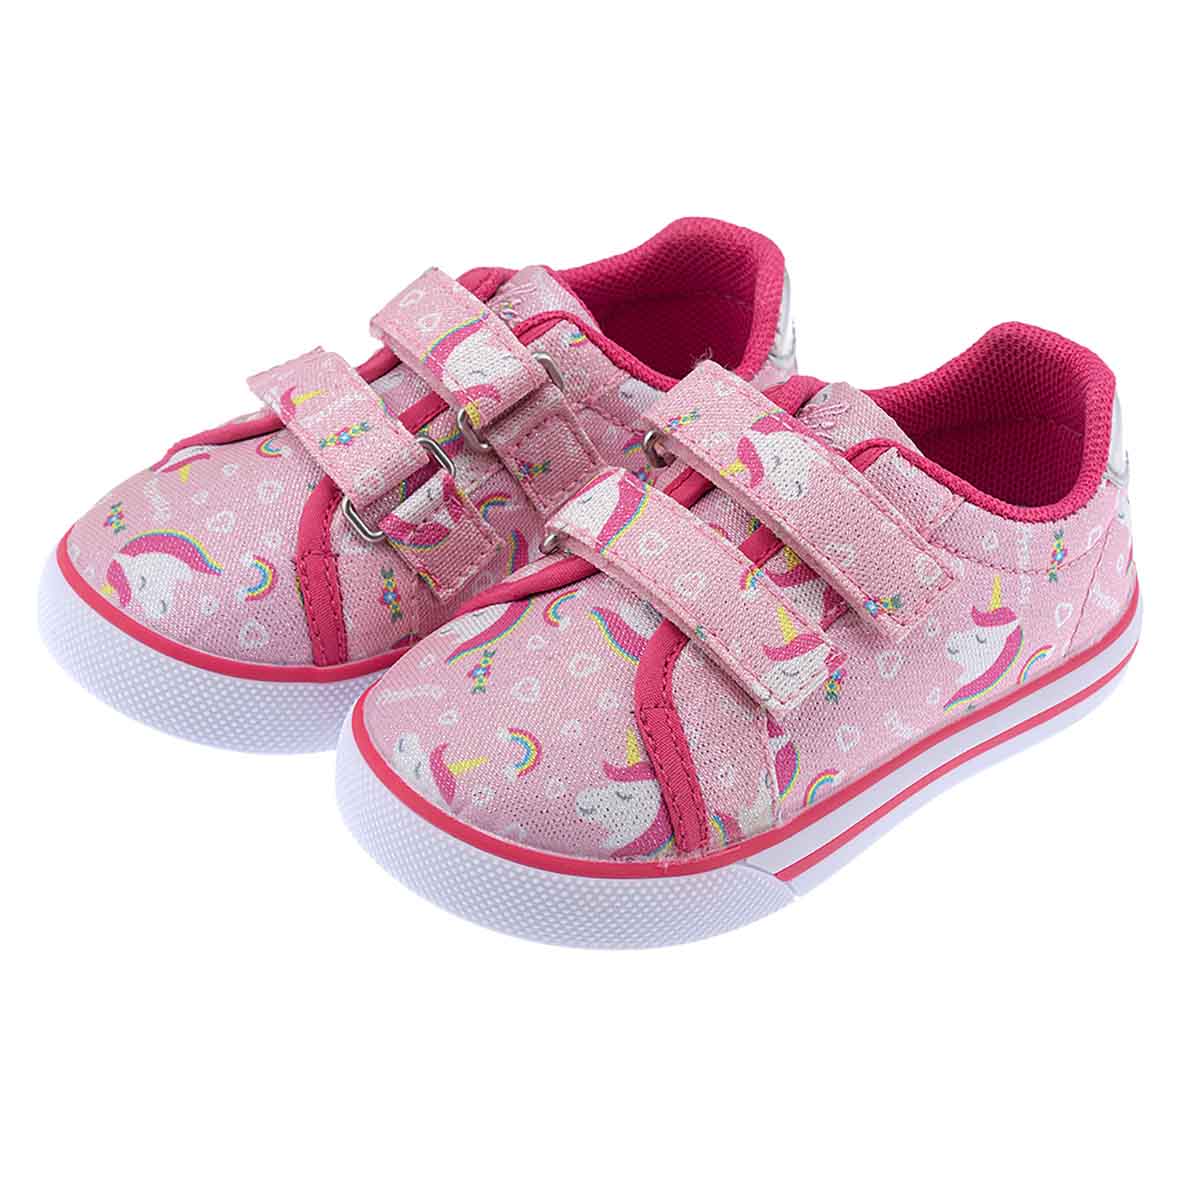 Chicco sneaker fany - Chicco